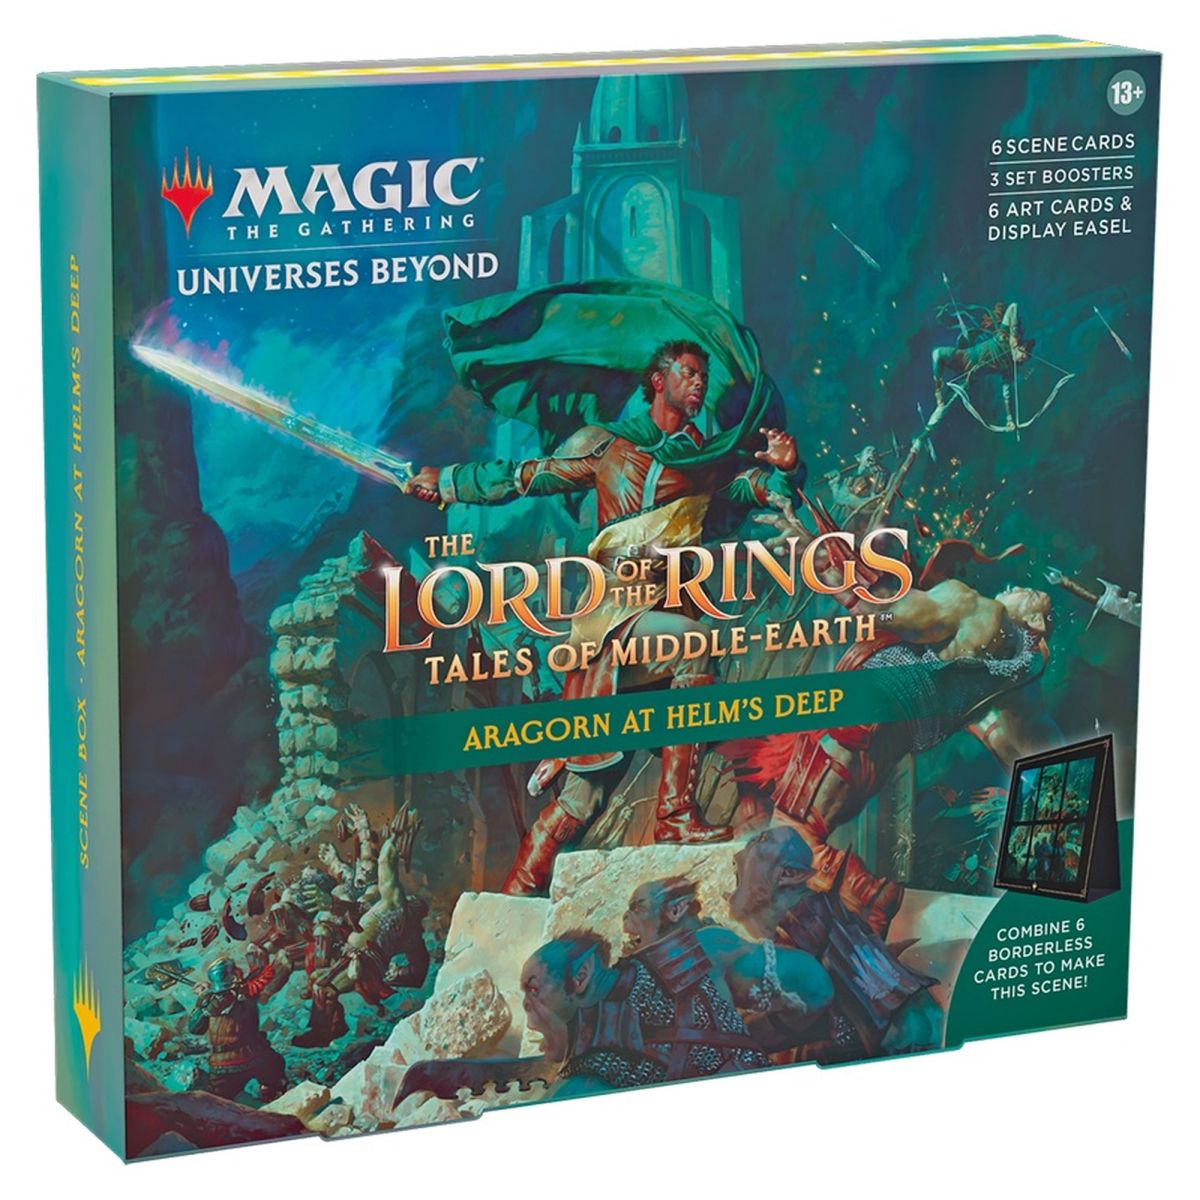 Magic The Gathering - Scene Box - The Lord of the Rings: Tales of Middle-earth - Aragorn At Helm's Deep - EN